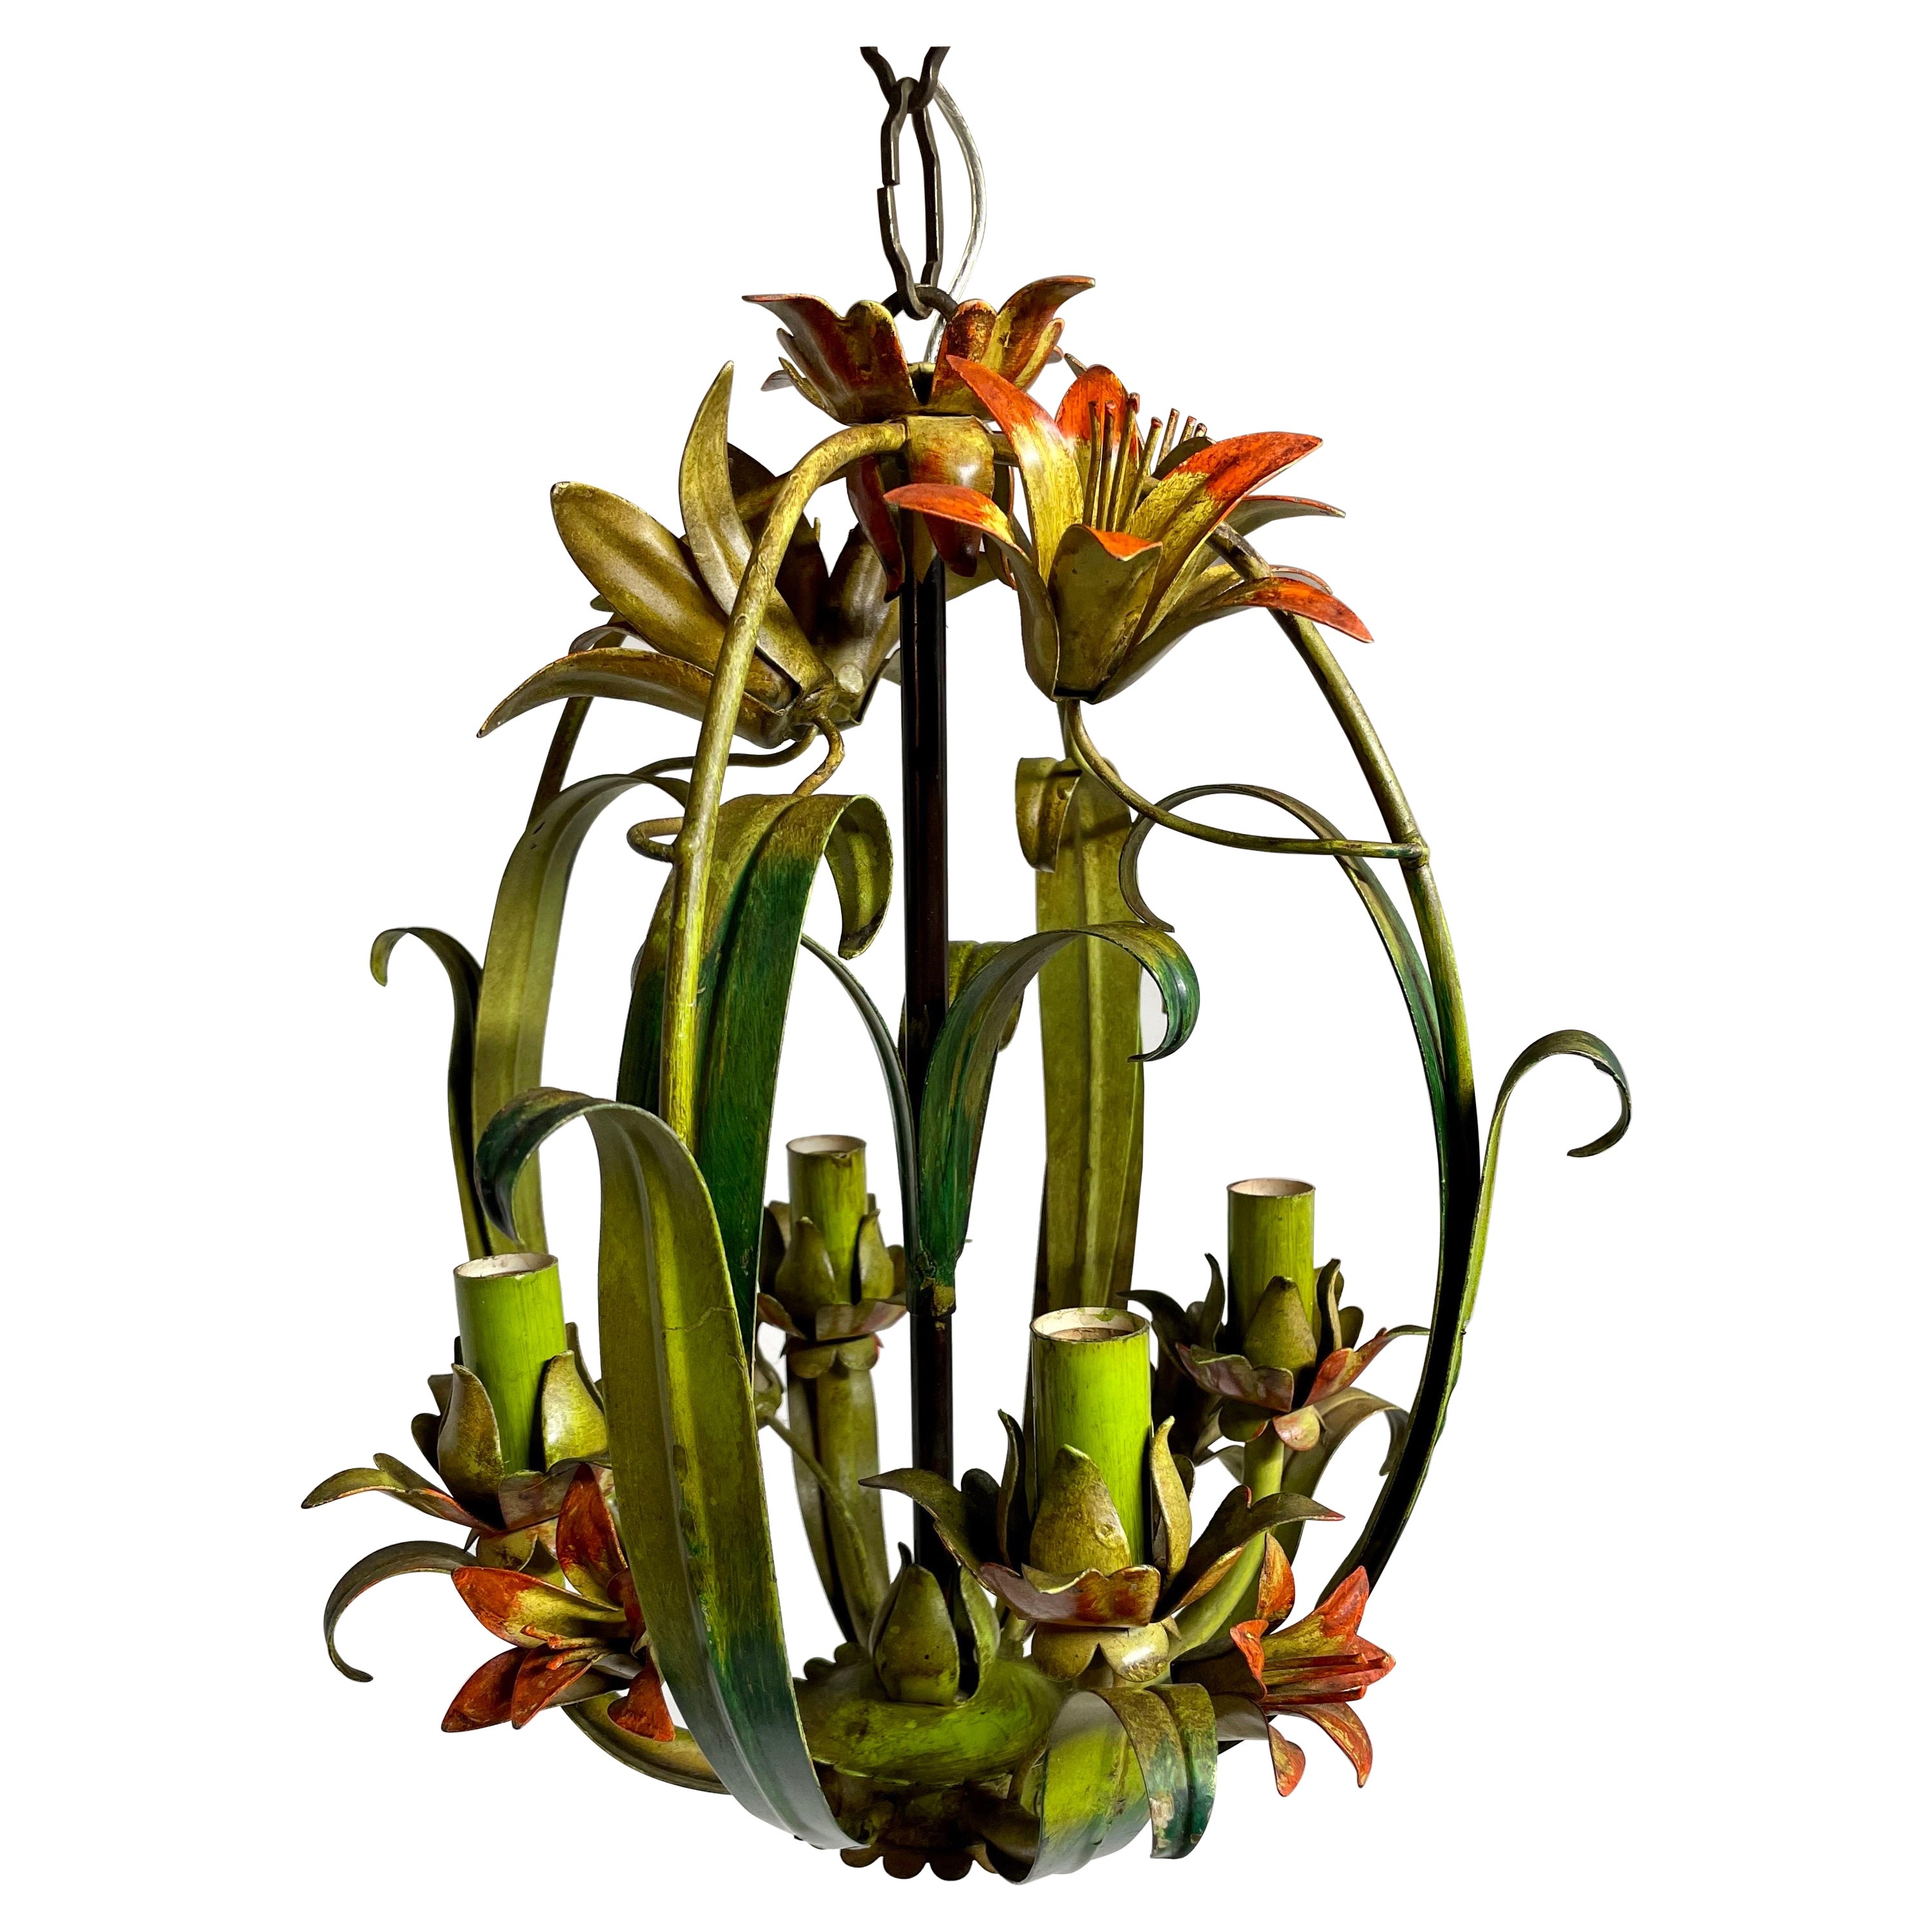 Italian Tole Floral Tole Chandelier with Lilies